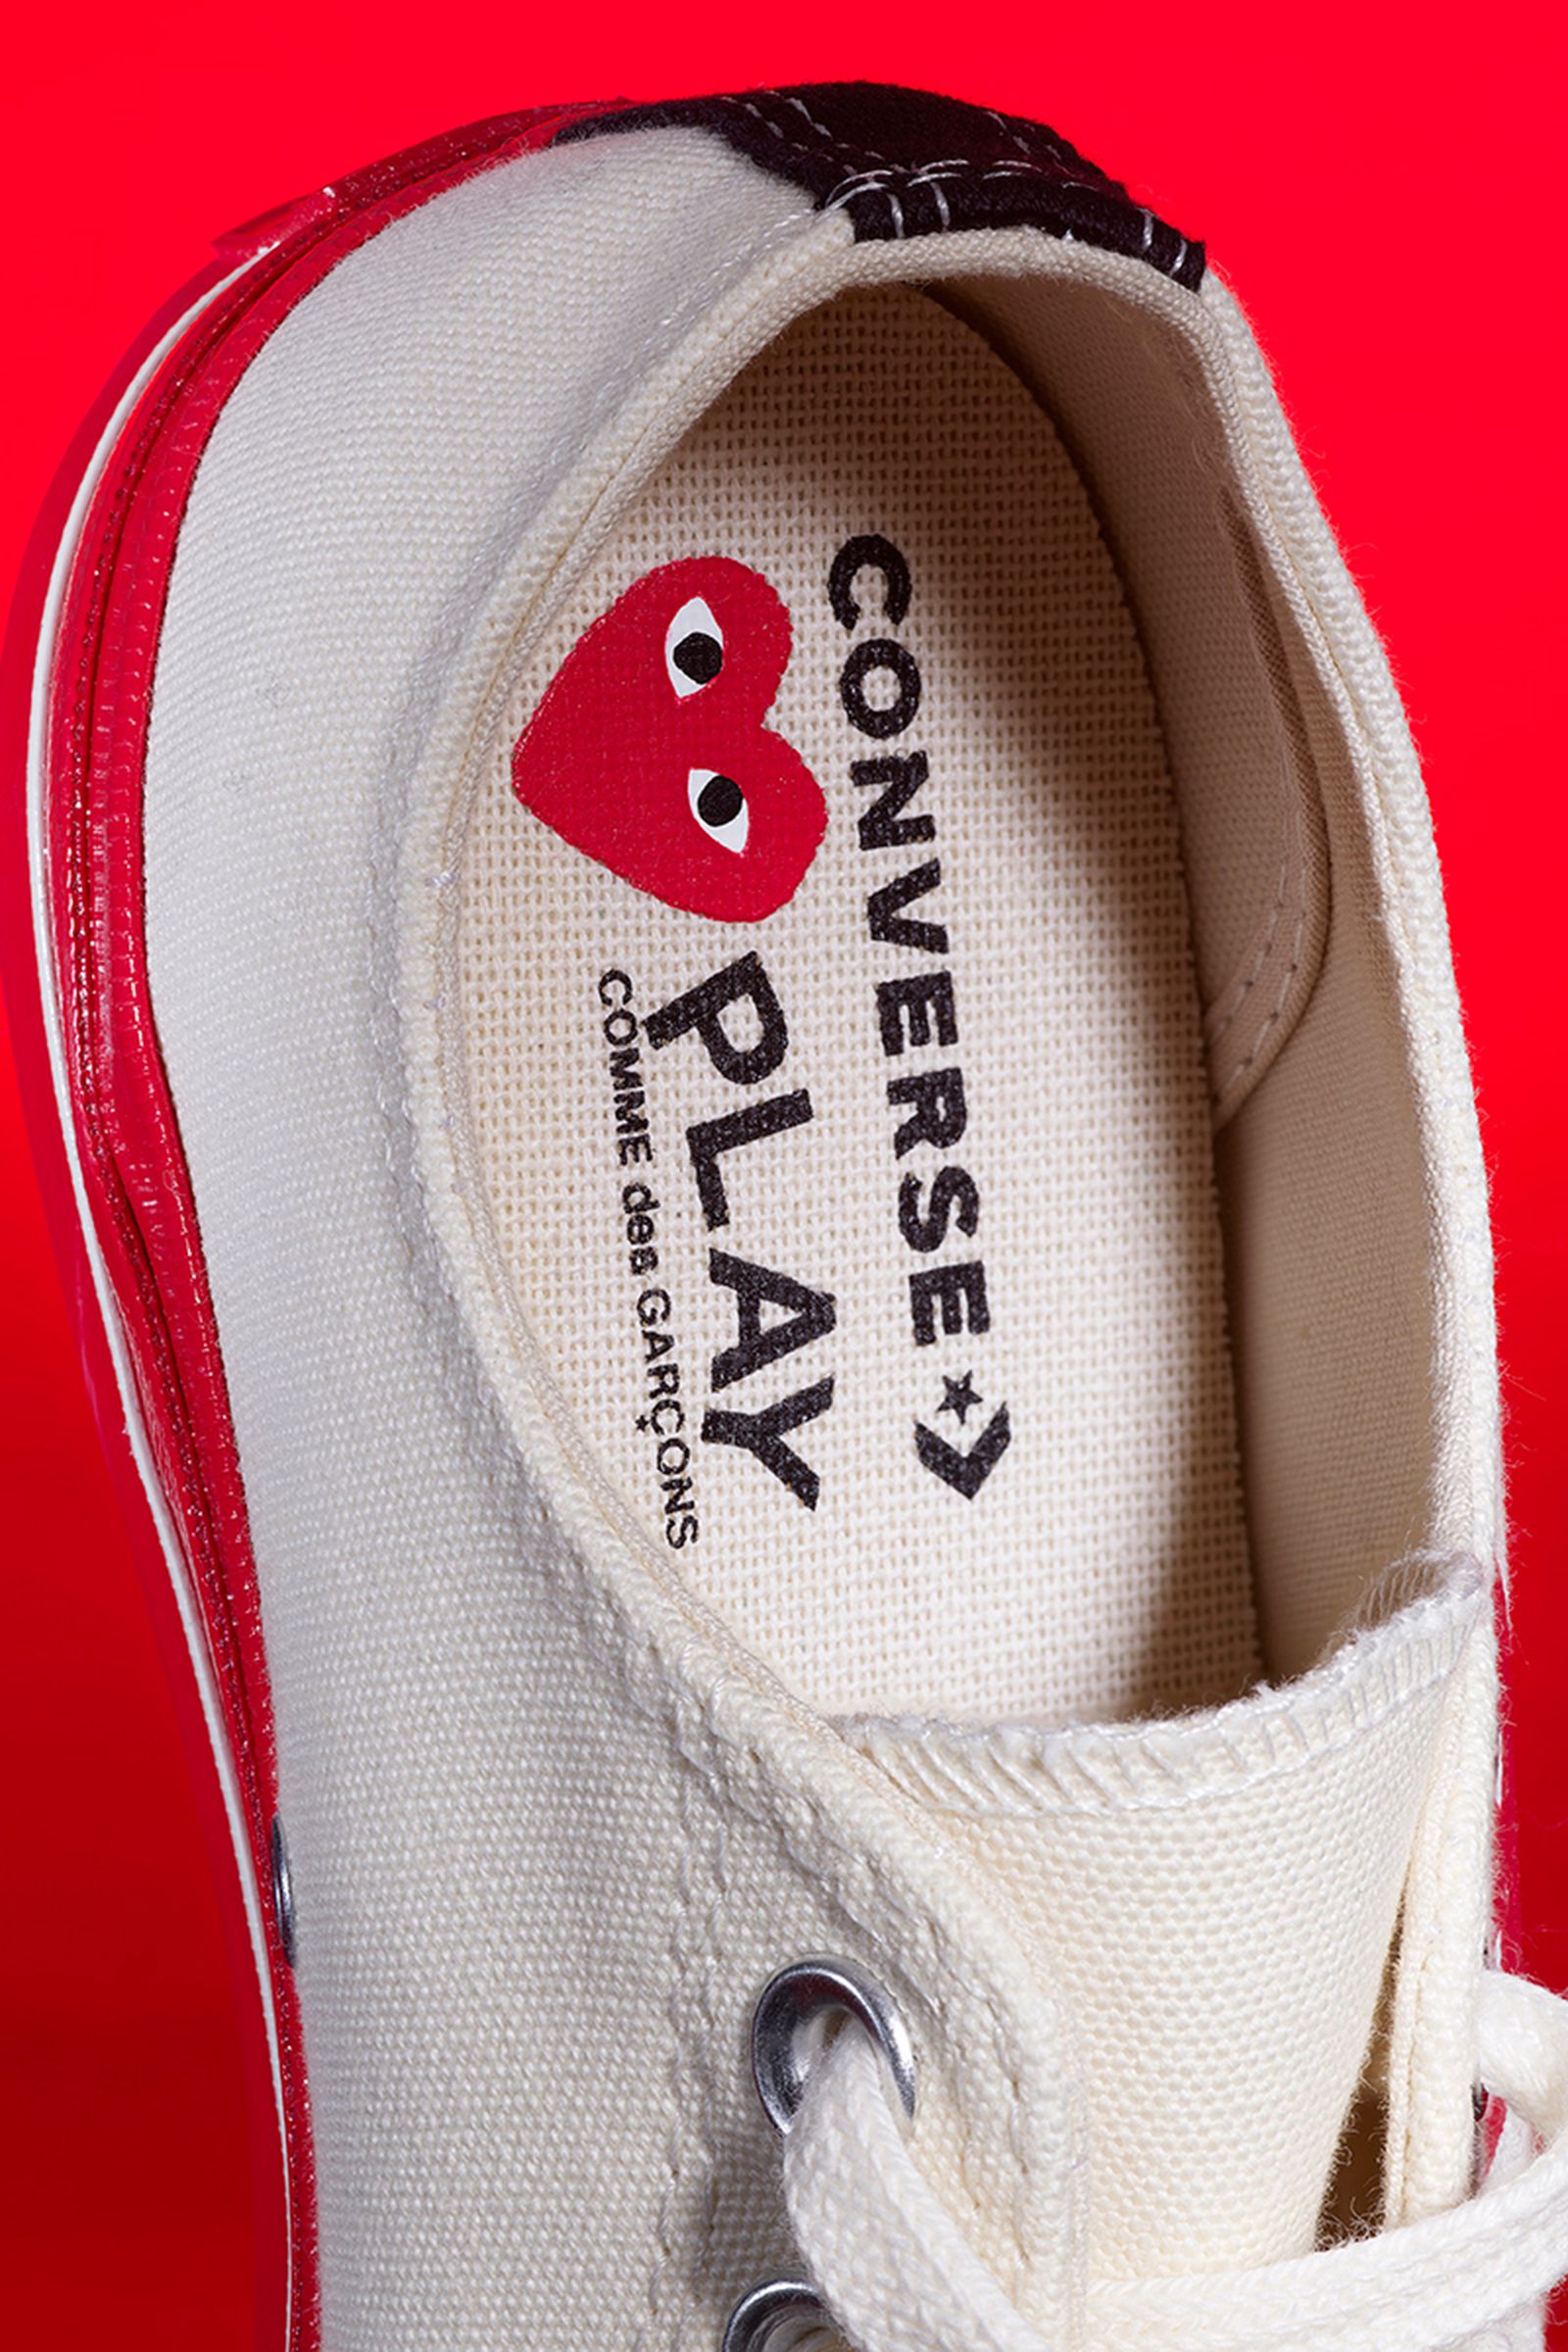 cdg-play-converse-chuck-70-red-release-date-price-2